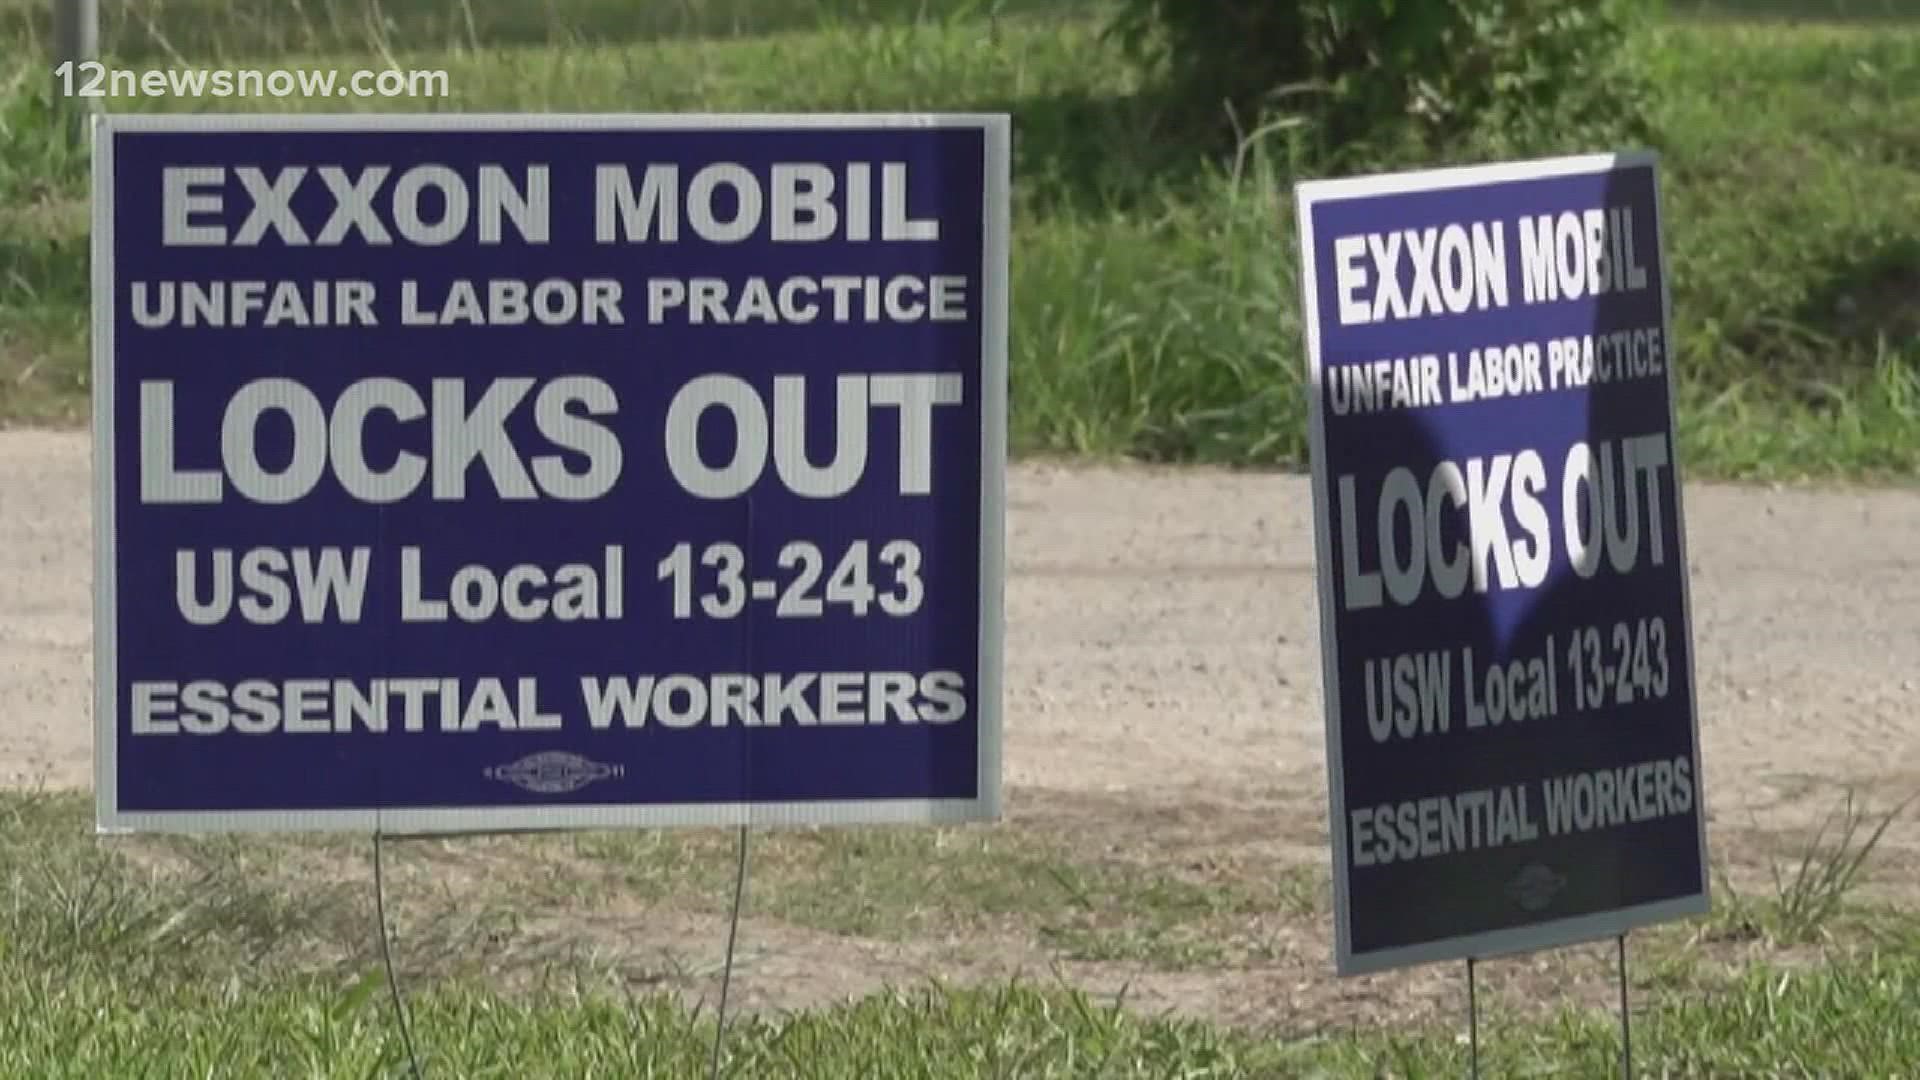 The National Labor Relations Board is investigating allegations of unfair labor practices charges against ExxonMobil and the union.